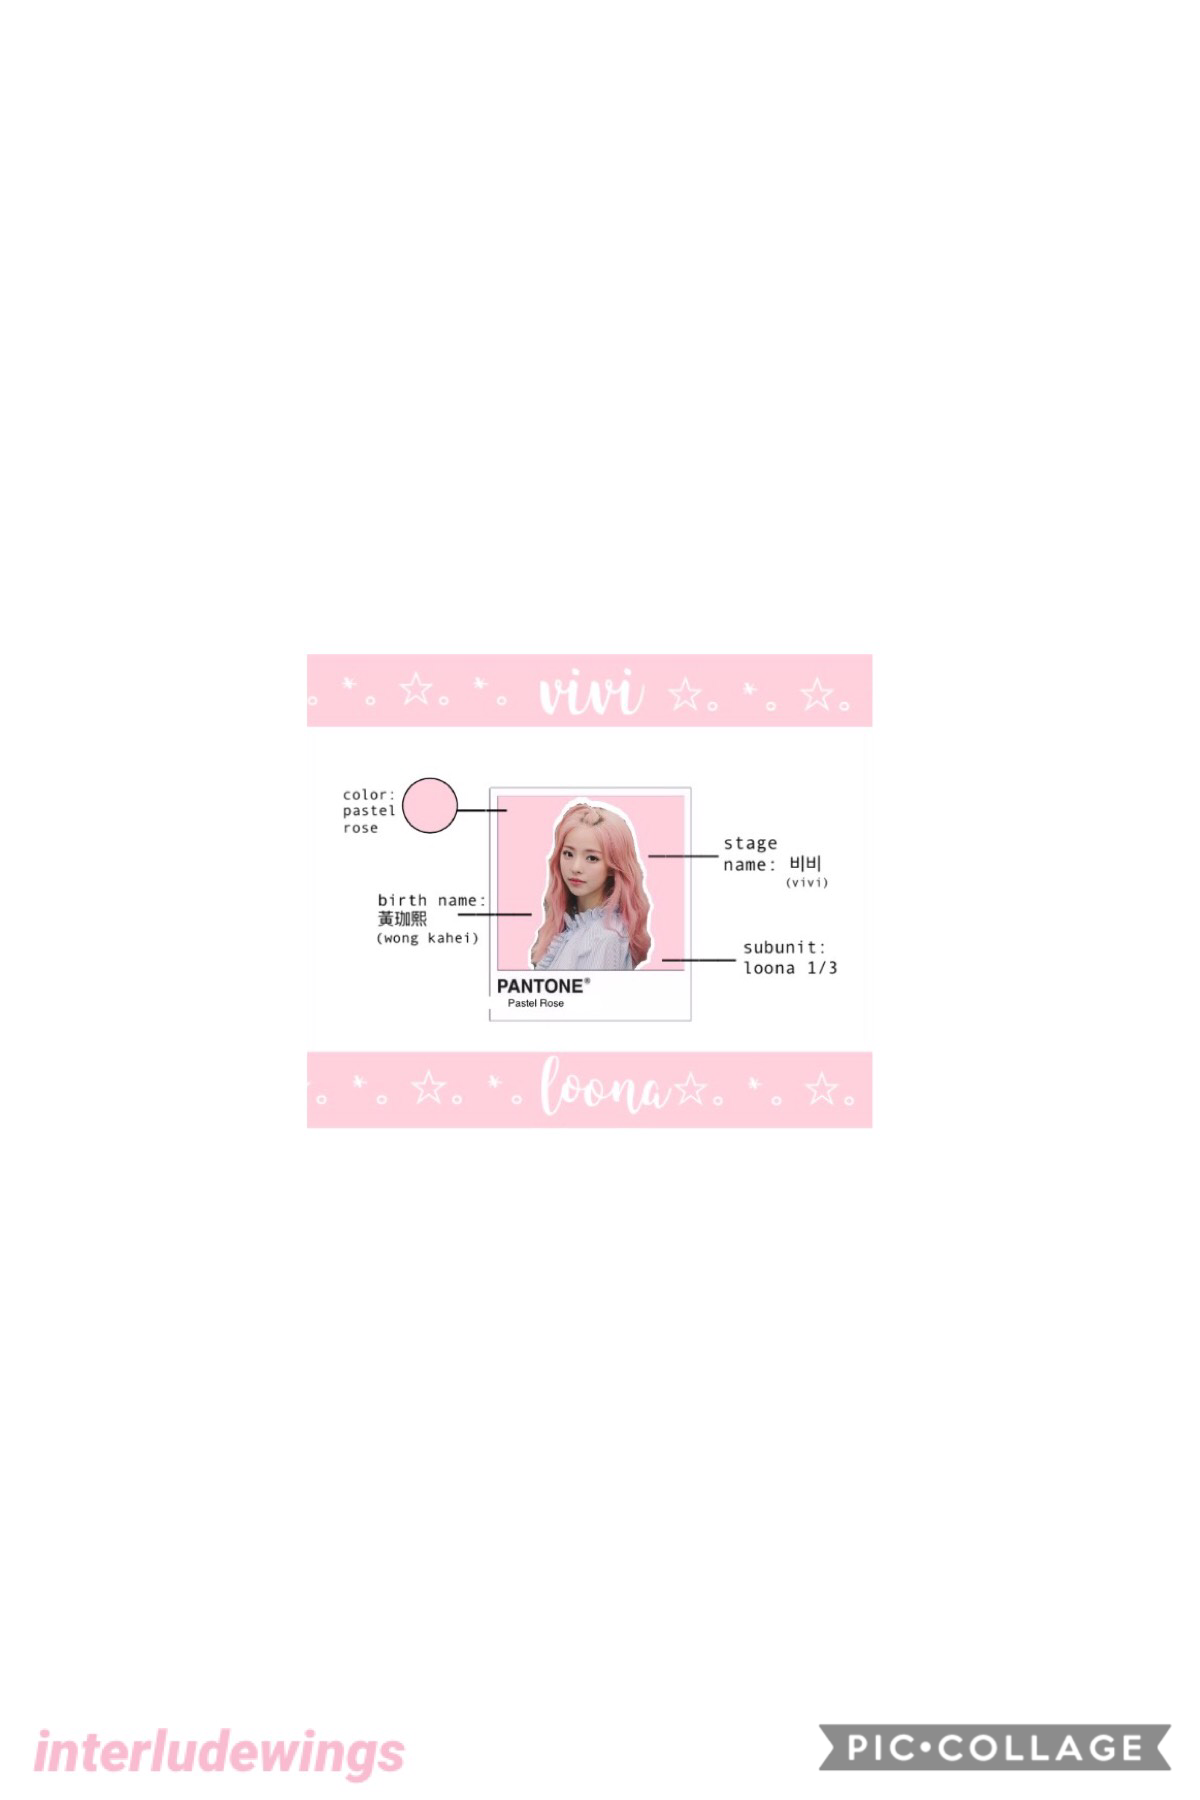 💞 open 💞
vivi~loona
loona released a single called ‘favorite’ today! please check it out it’s really good!